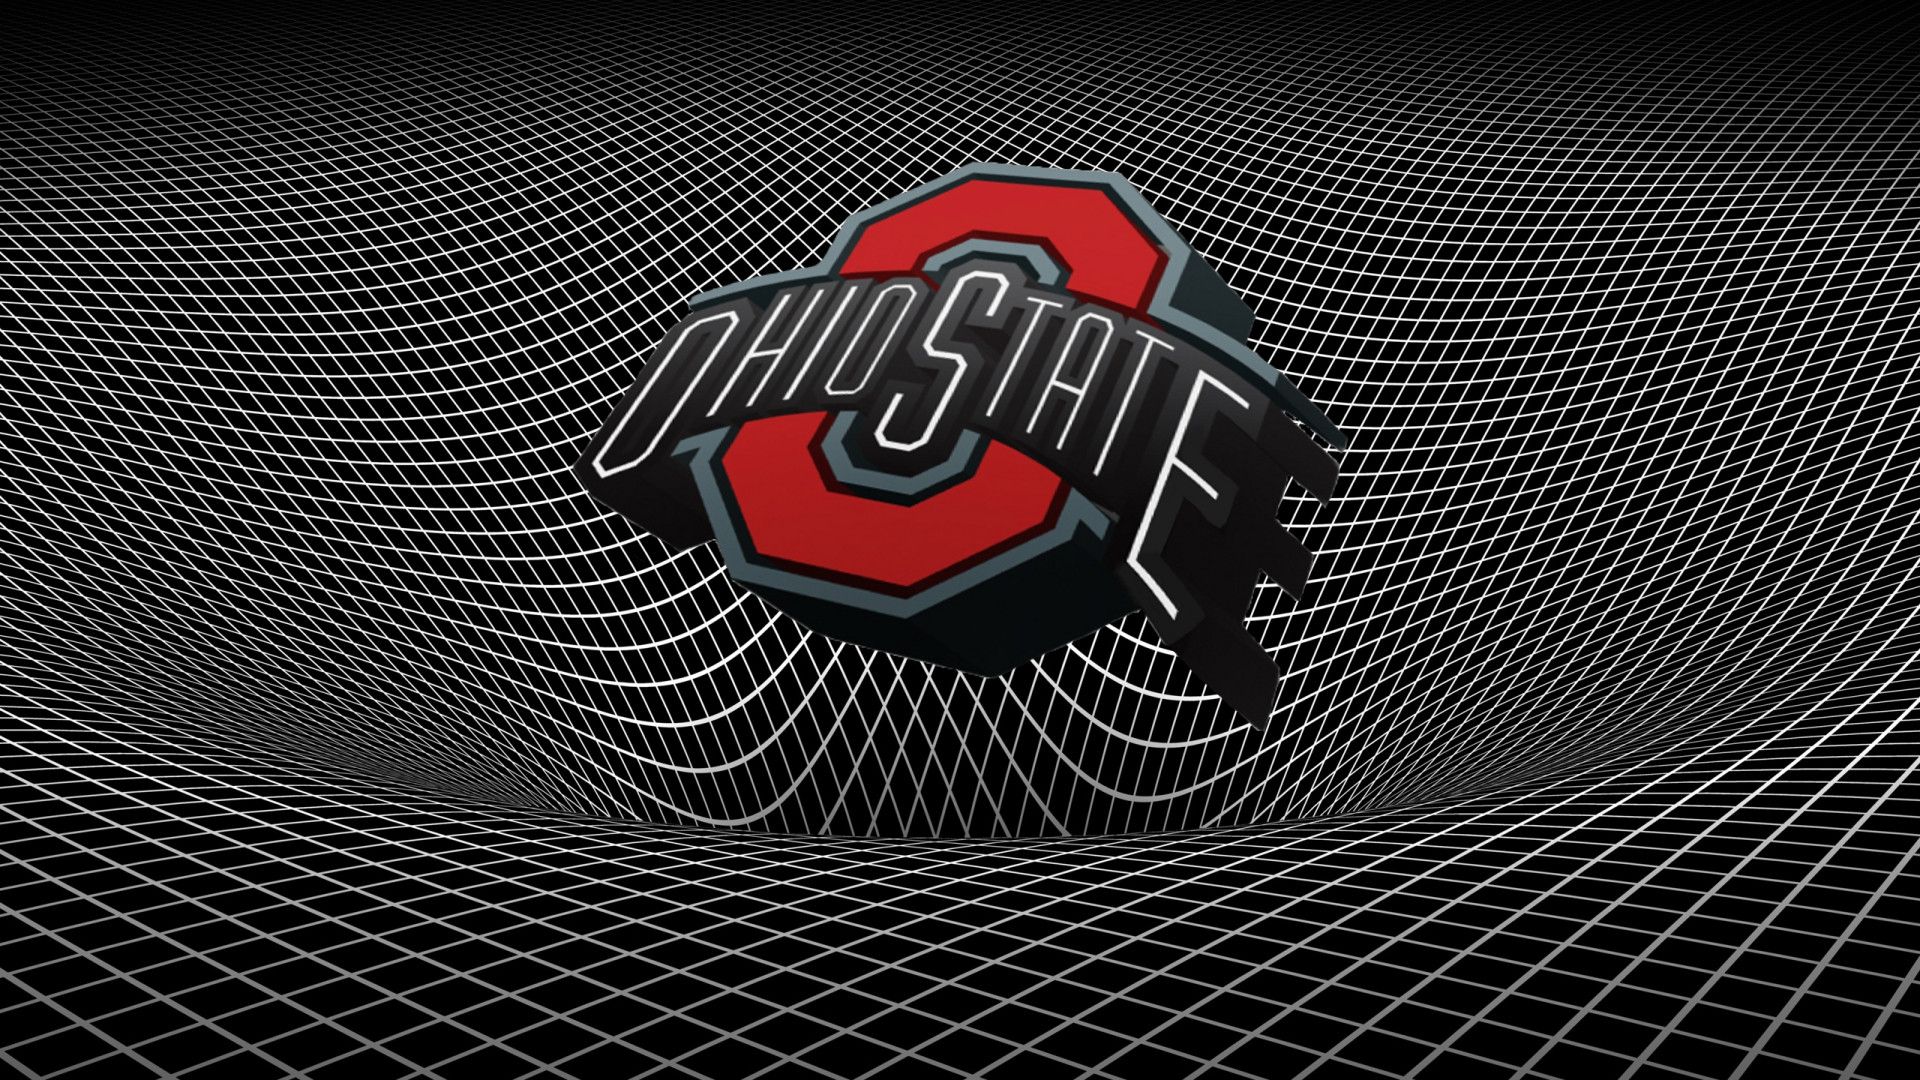 Ohio State Buckeyes Wallpapers Wallpapers, Backgrounds, Images